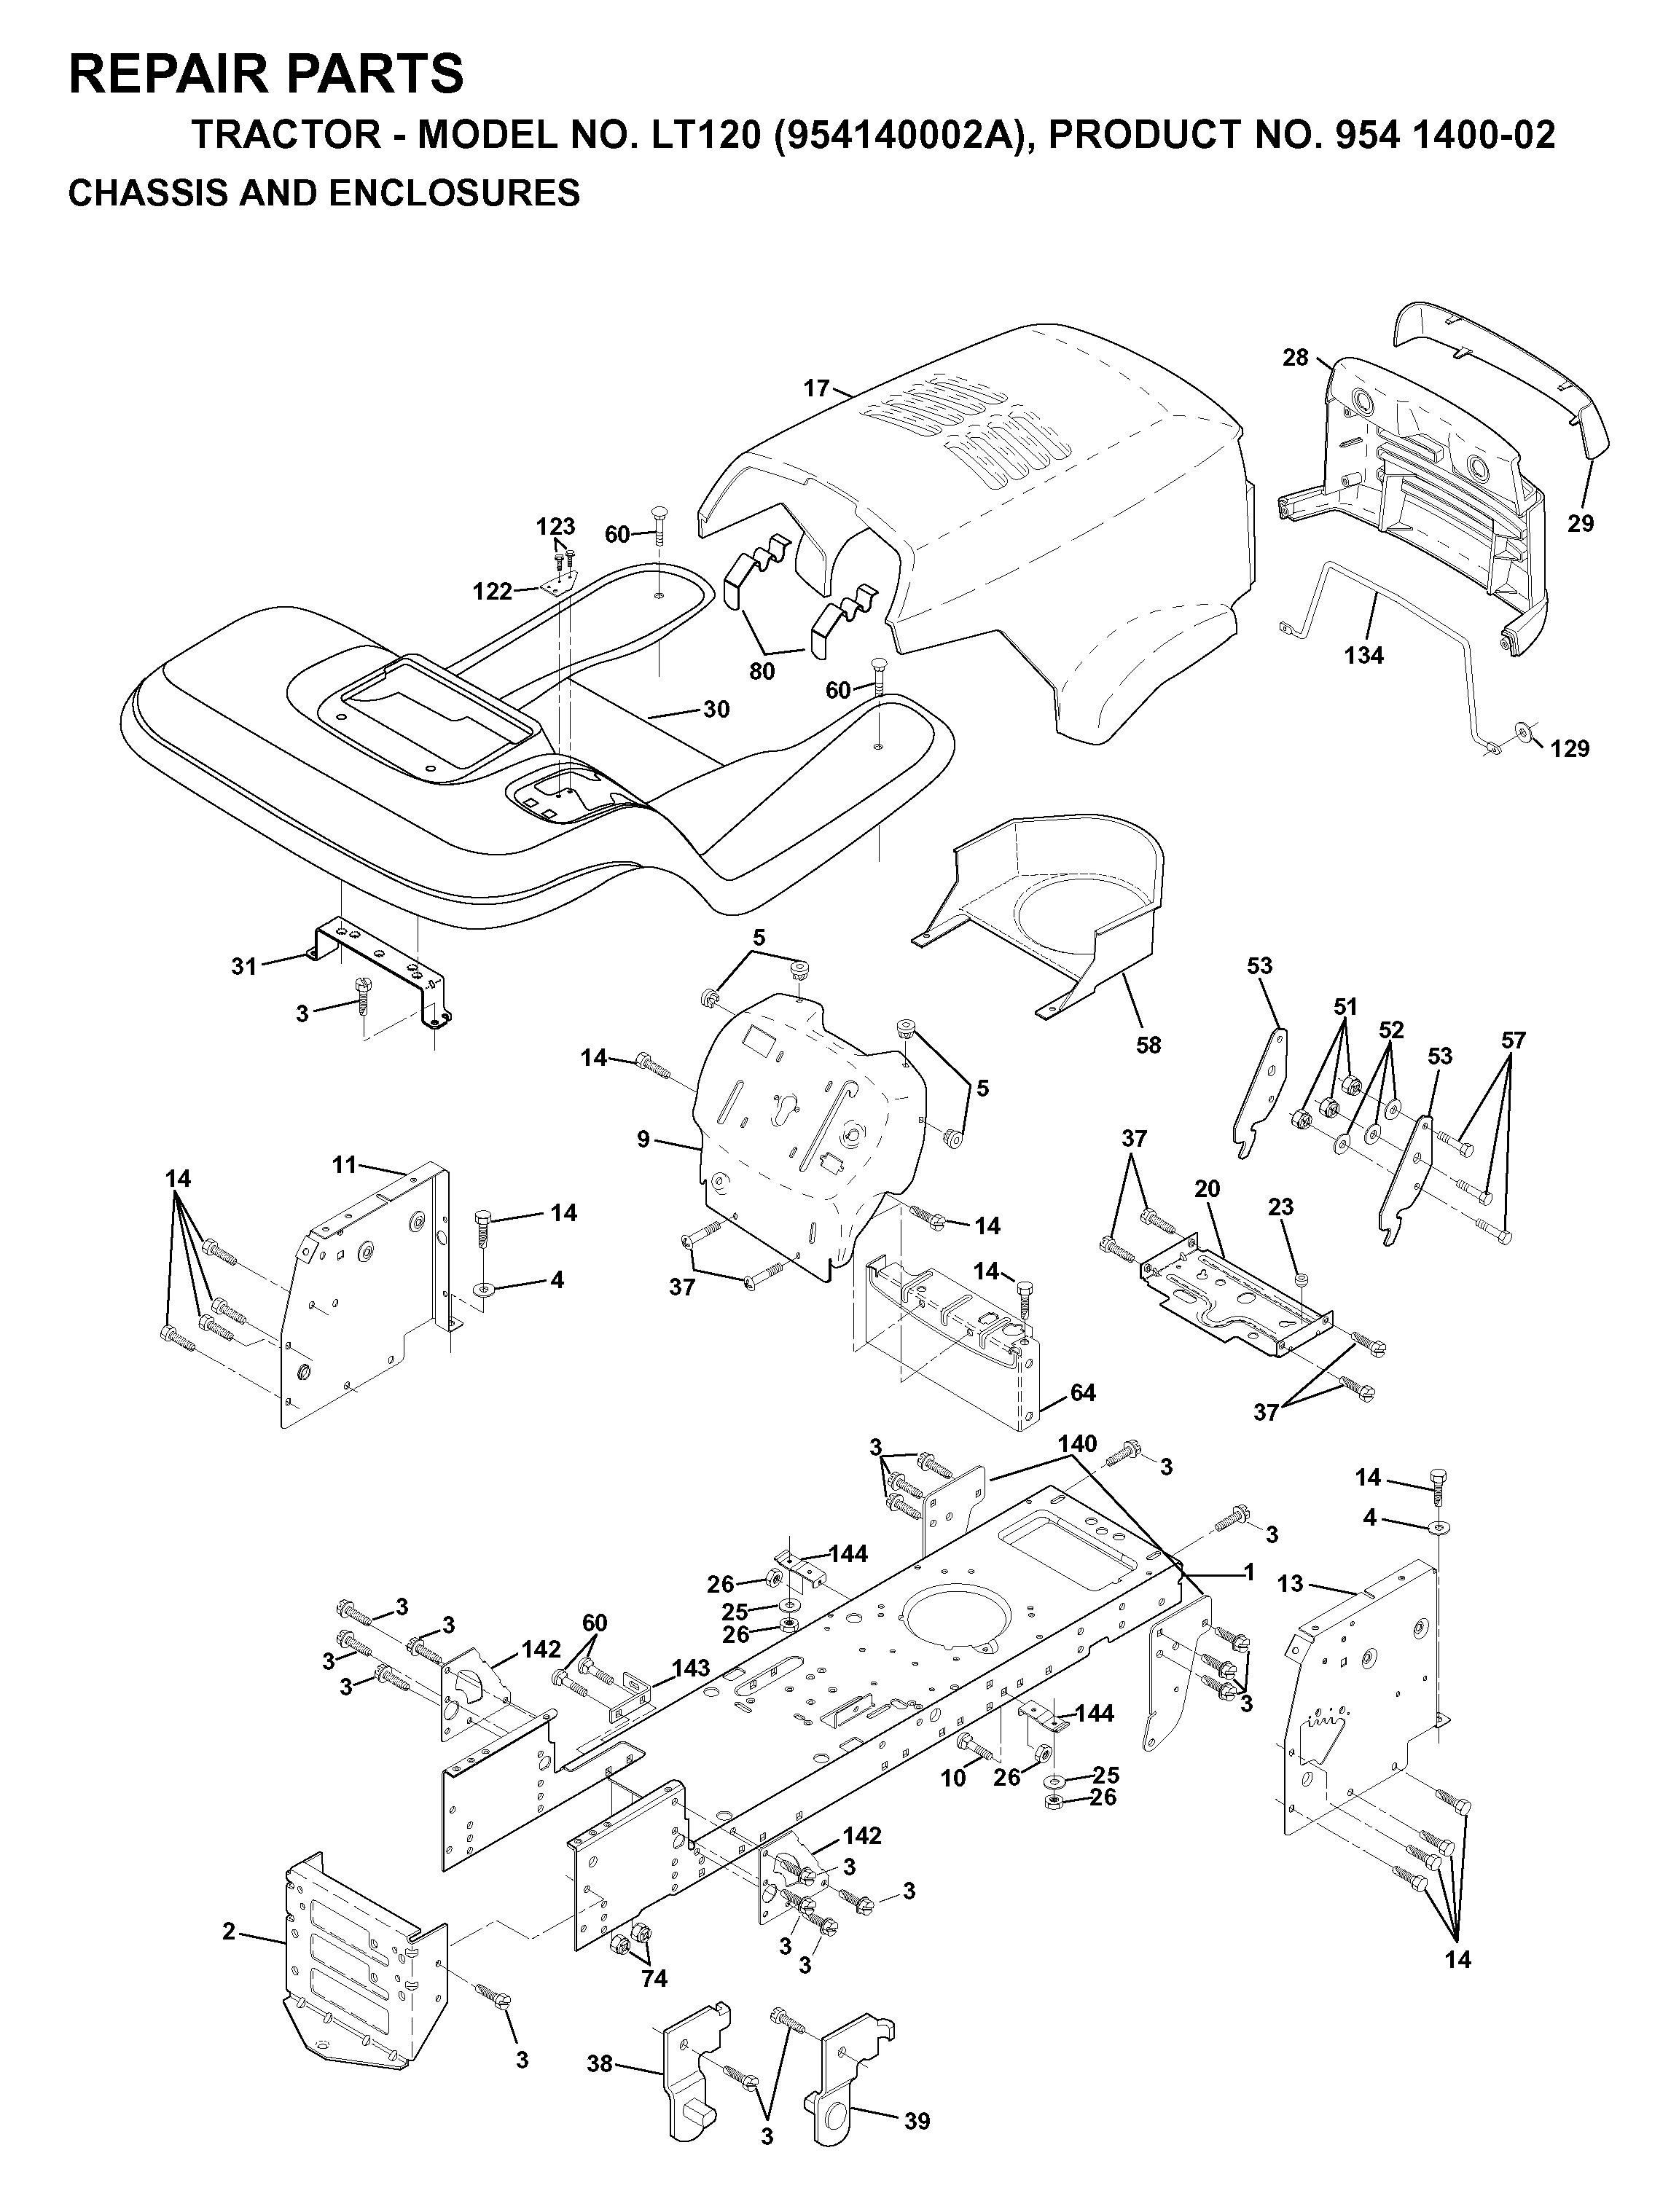 Chassis and appendix 532153871, 532145009, 817490612, 819131216, 532155272, 872140608, 532174996, 532157262, 596564001, 532156051, 532180679, 532124028, 734117201, 596322601, 532149776, 532149777, 532156489, 532139976, 596030701, 532139886, 532139887, 586668901, 596135301, 532150067, 596230901, 532150127, 872140606, 532154798, 596322601, 532155854, 734115301, 532150132, 532158418, 532156095, 532186689, 532154207, 532154334, 532005479